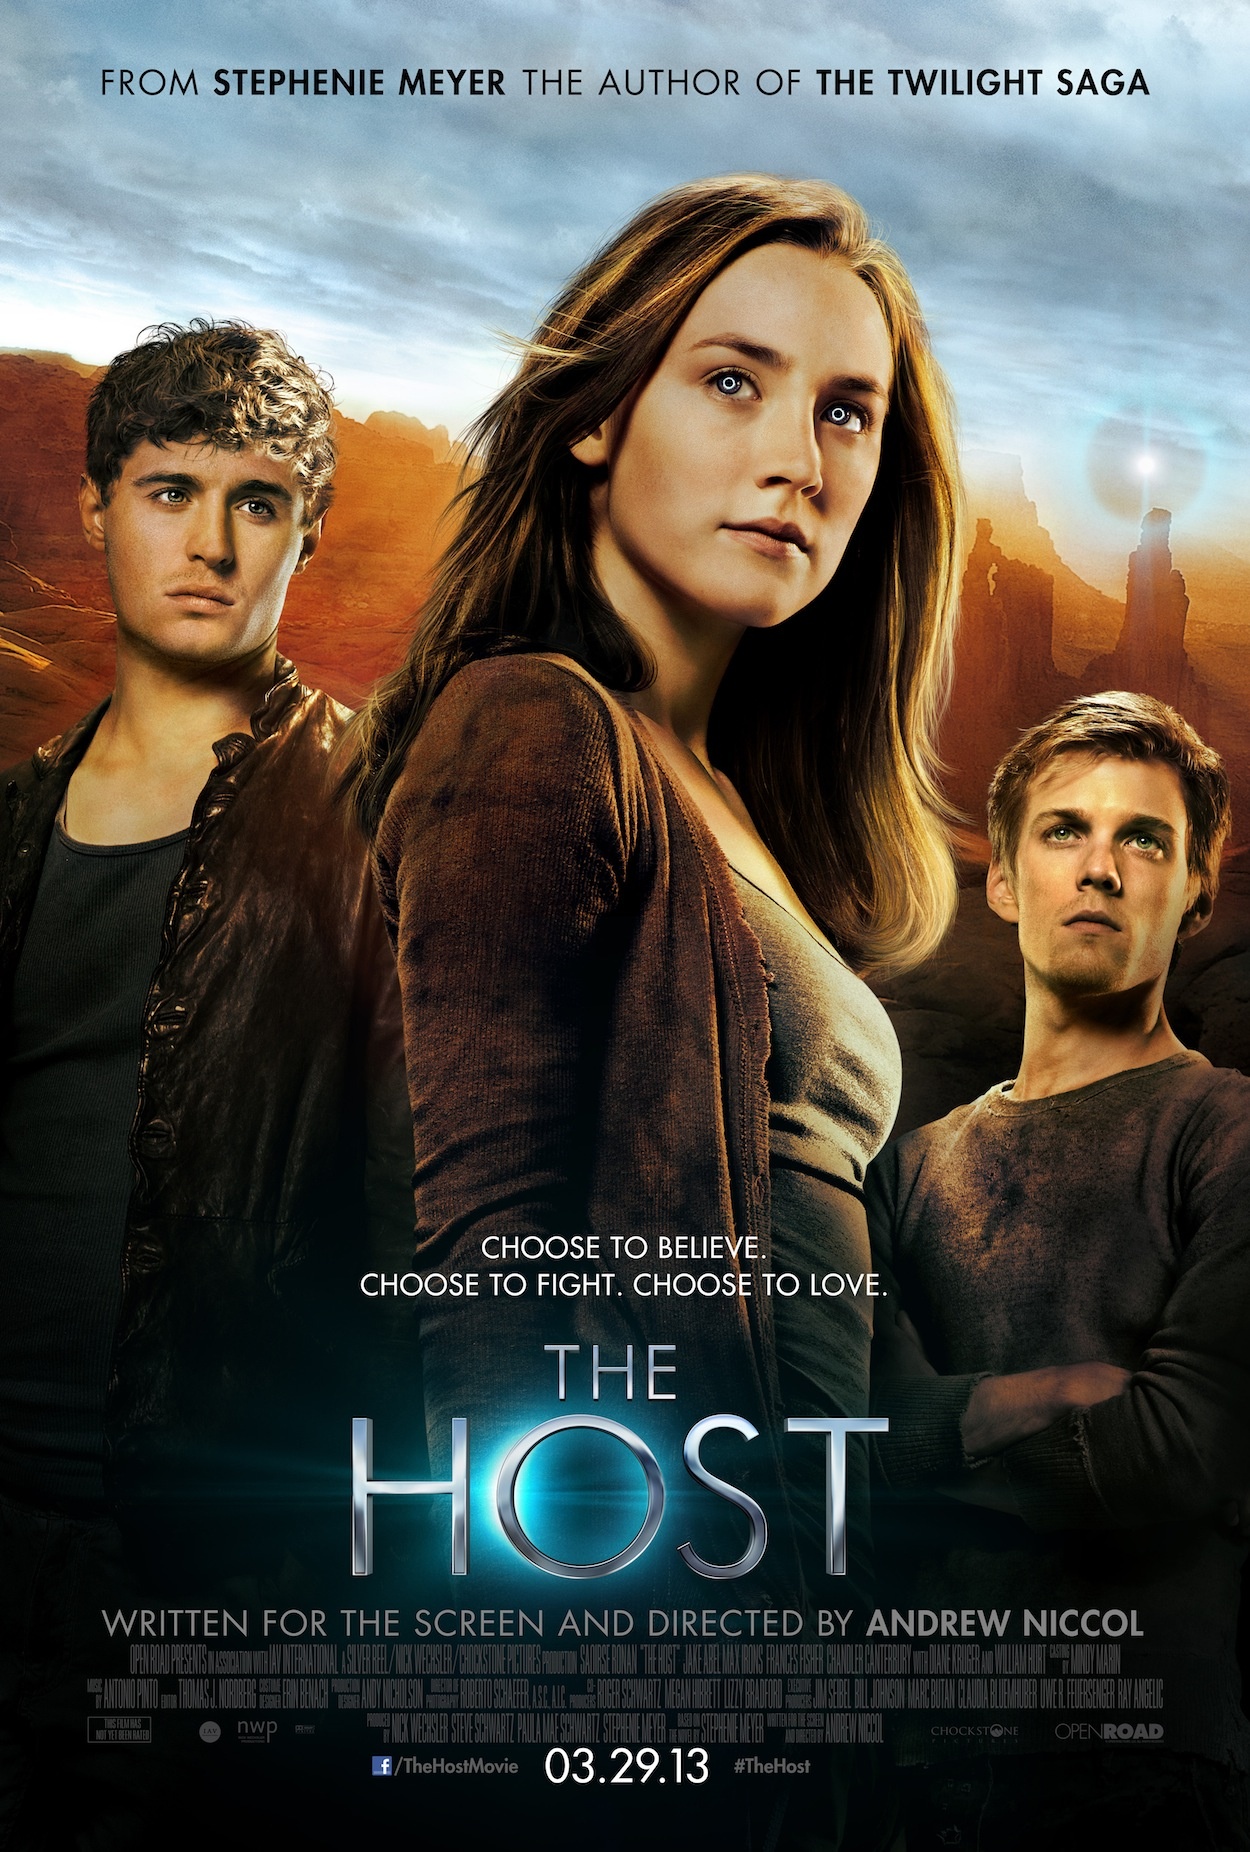 The Host (Movie Review)